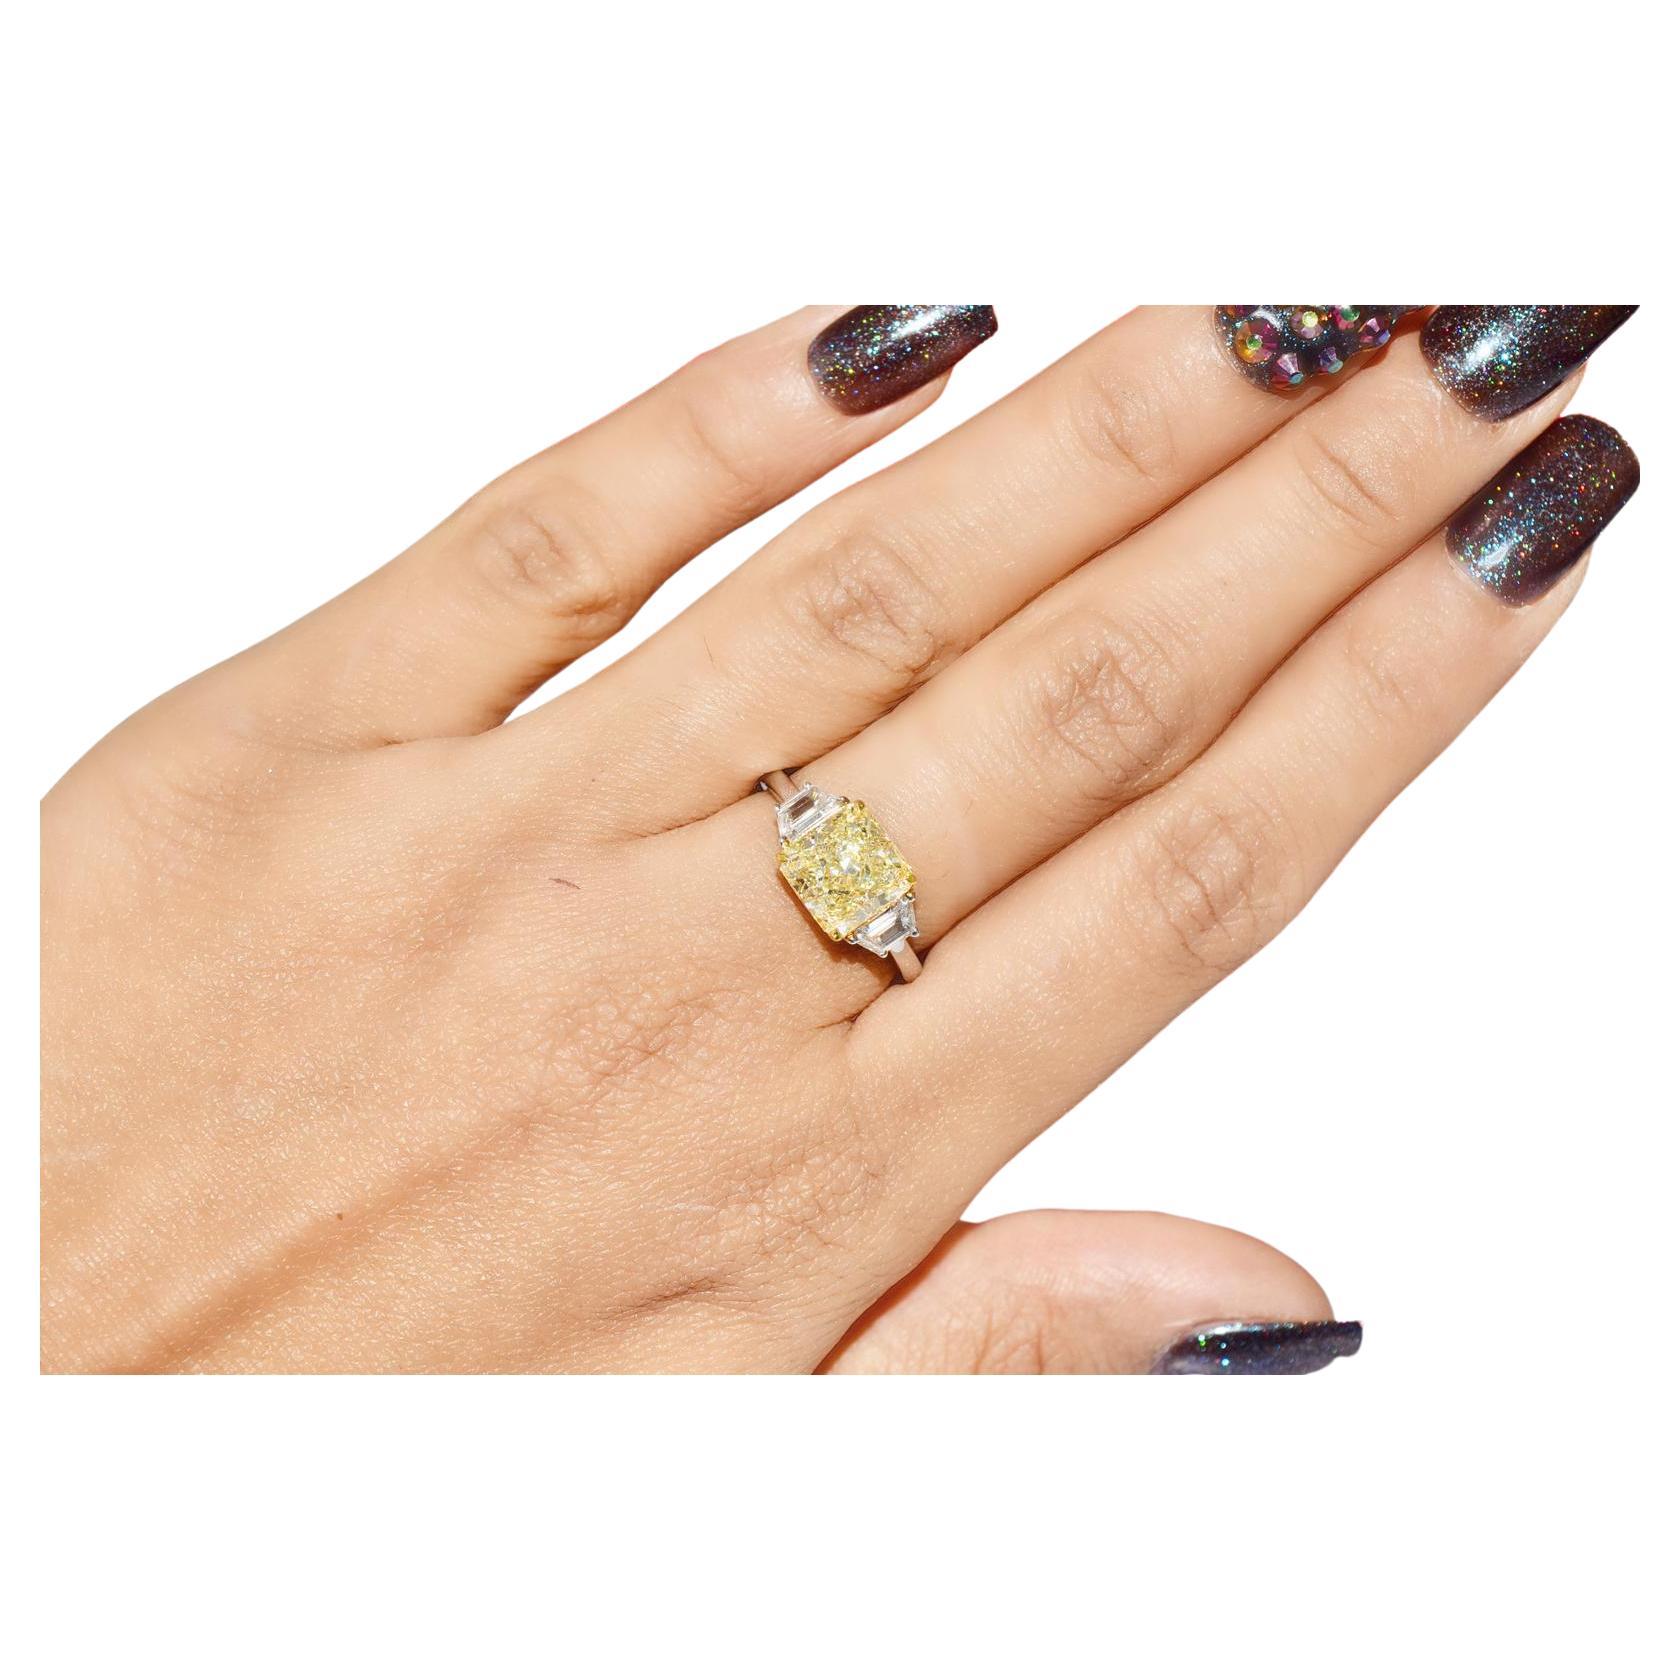 3.01 Carat Yellow Diamond Ring VS1 Clarity GIA Certified For Sale